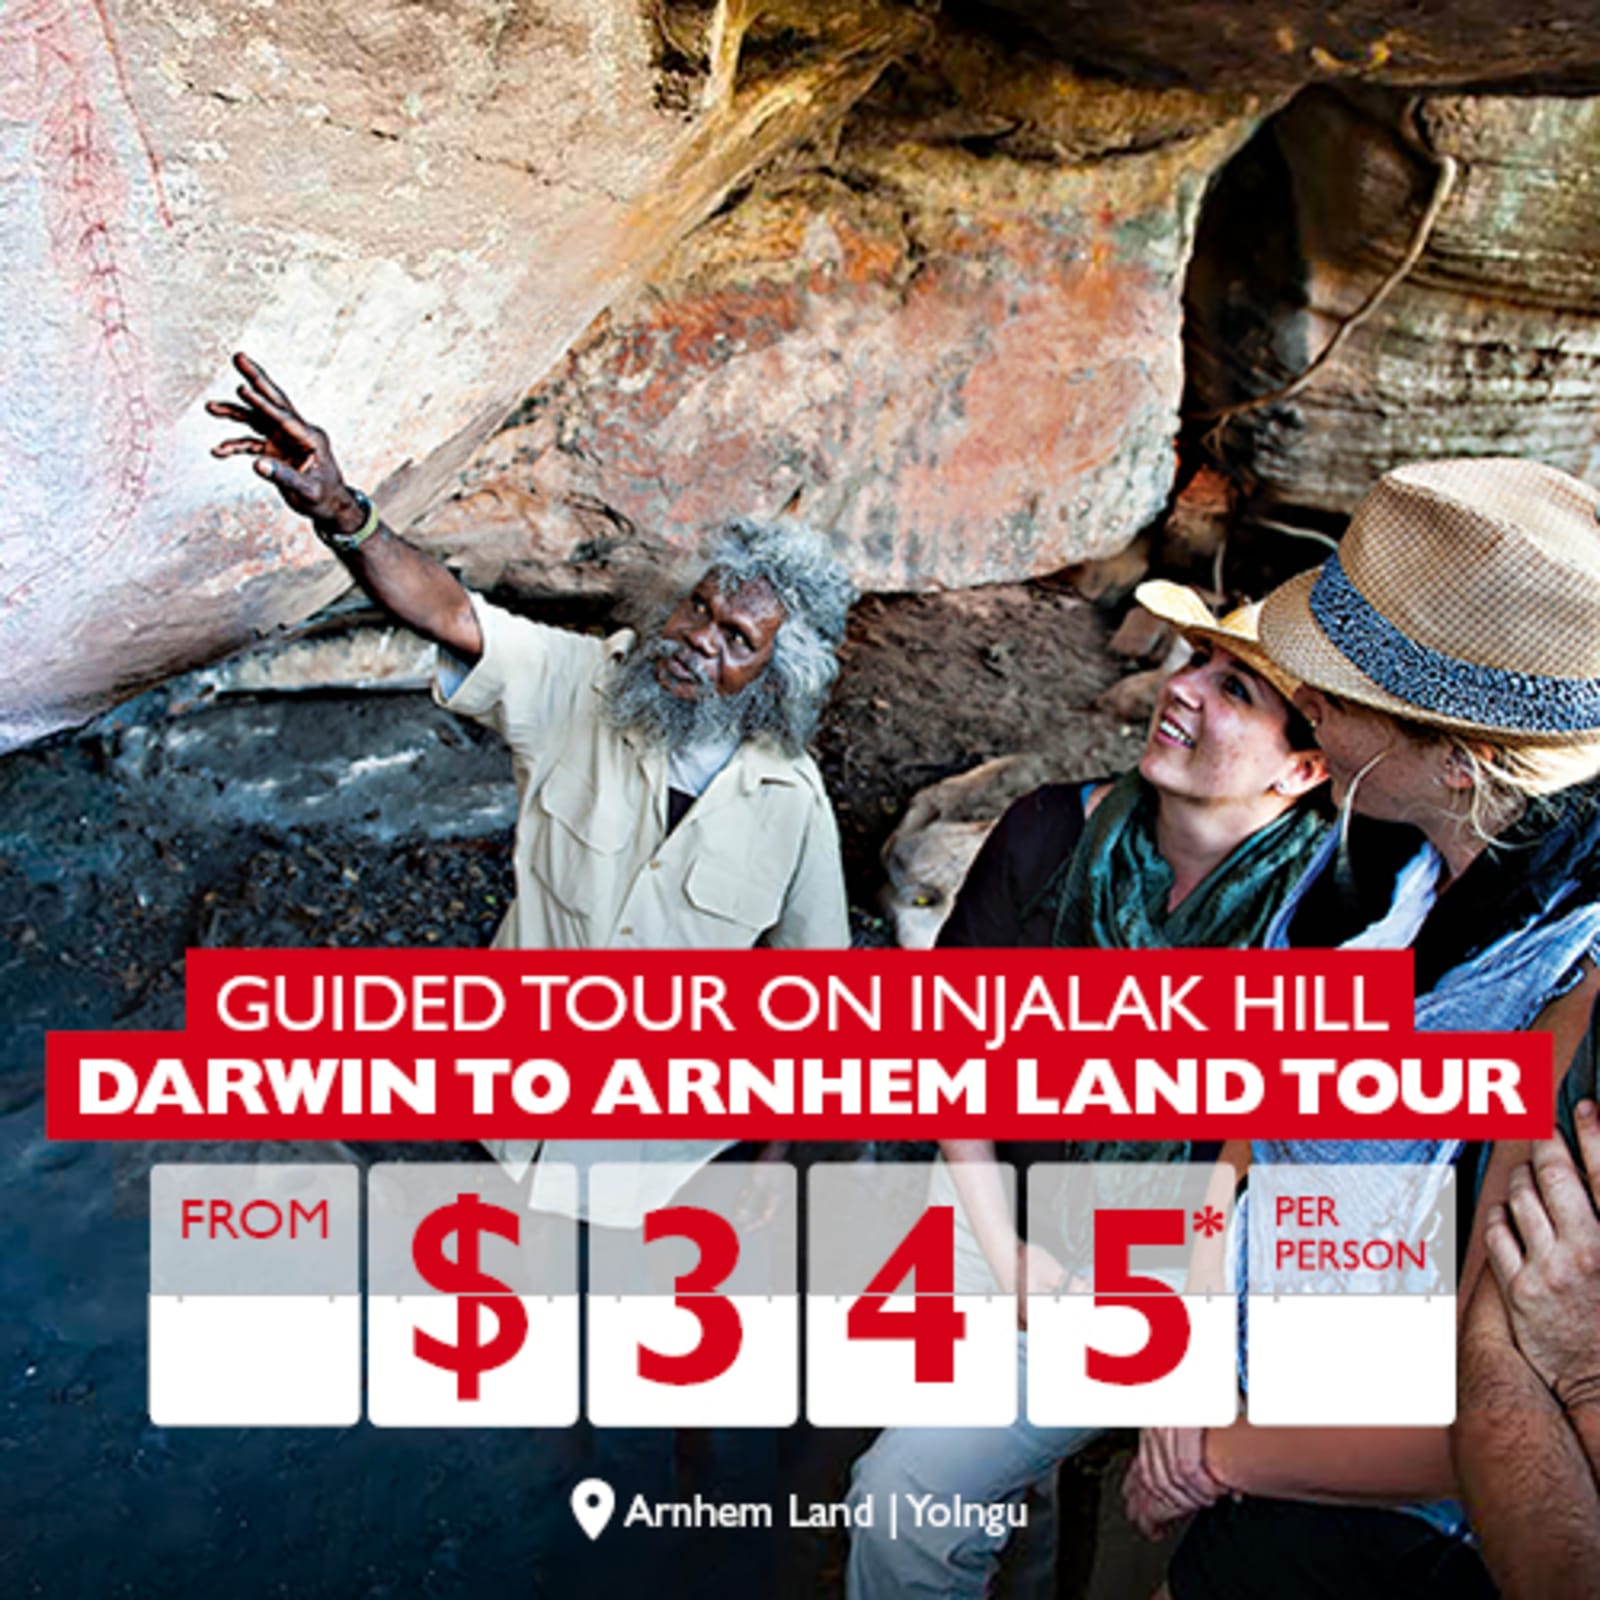 Guided tour on Injalak Hill | Darwin to Arnhem Land tour from $345* per person